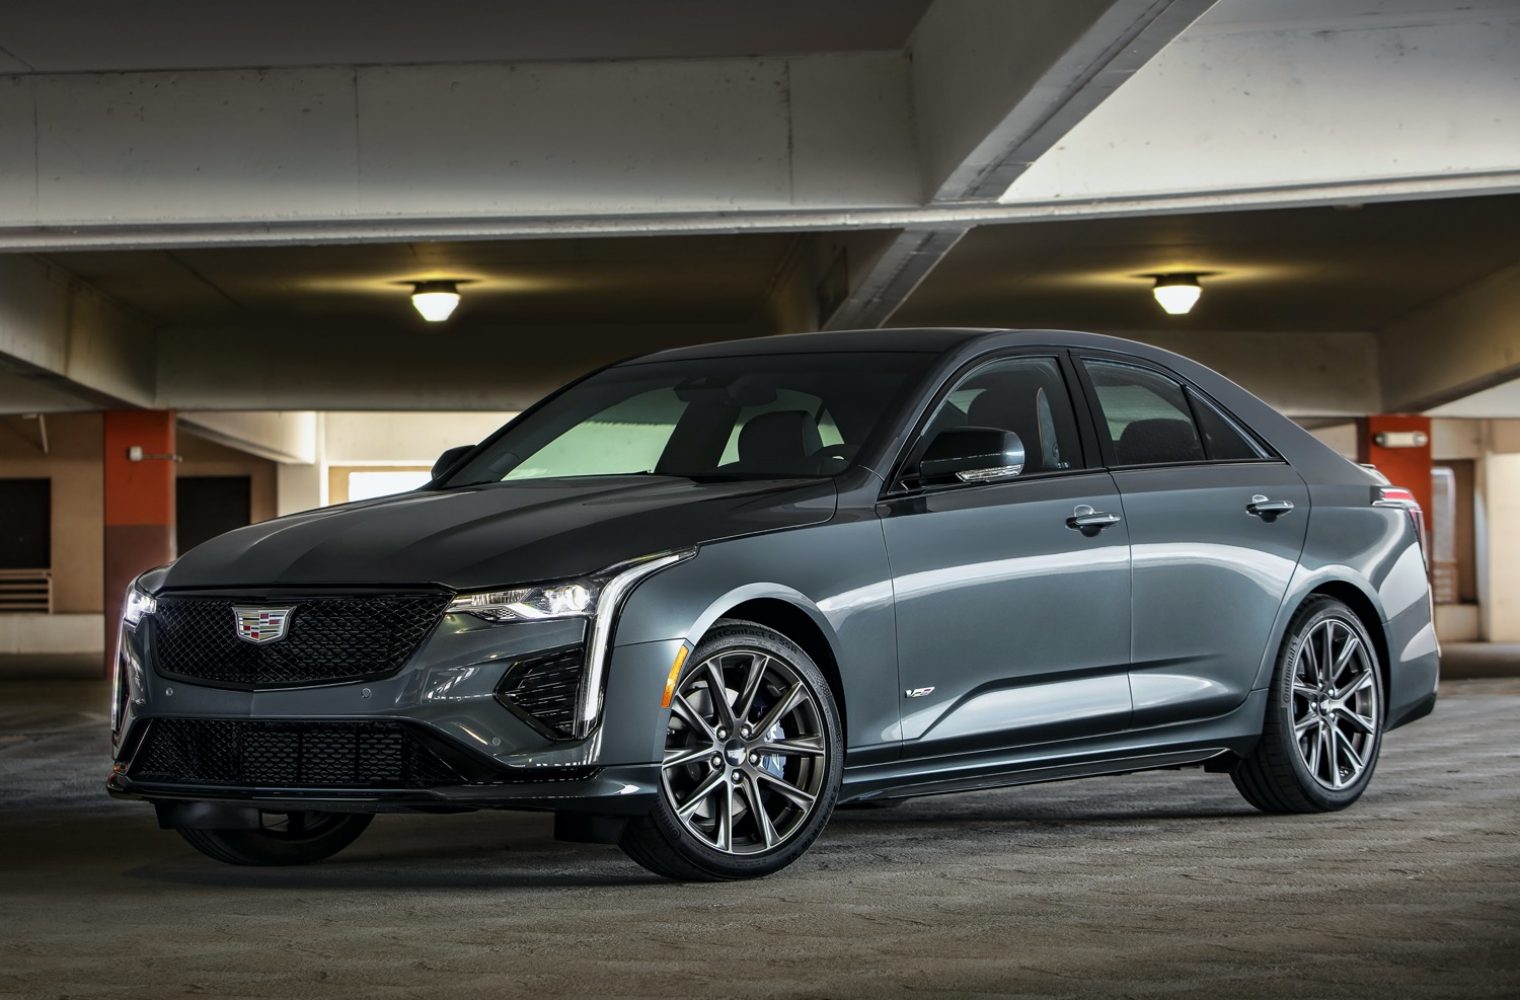 2023 Cadillac CT4V Availability To Be Extremely Limited